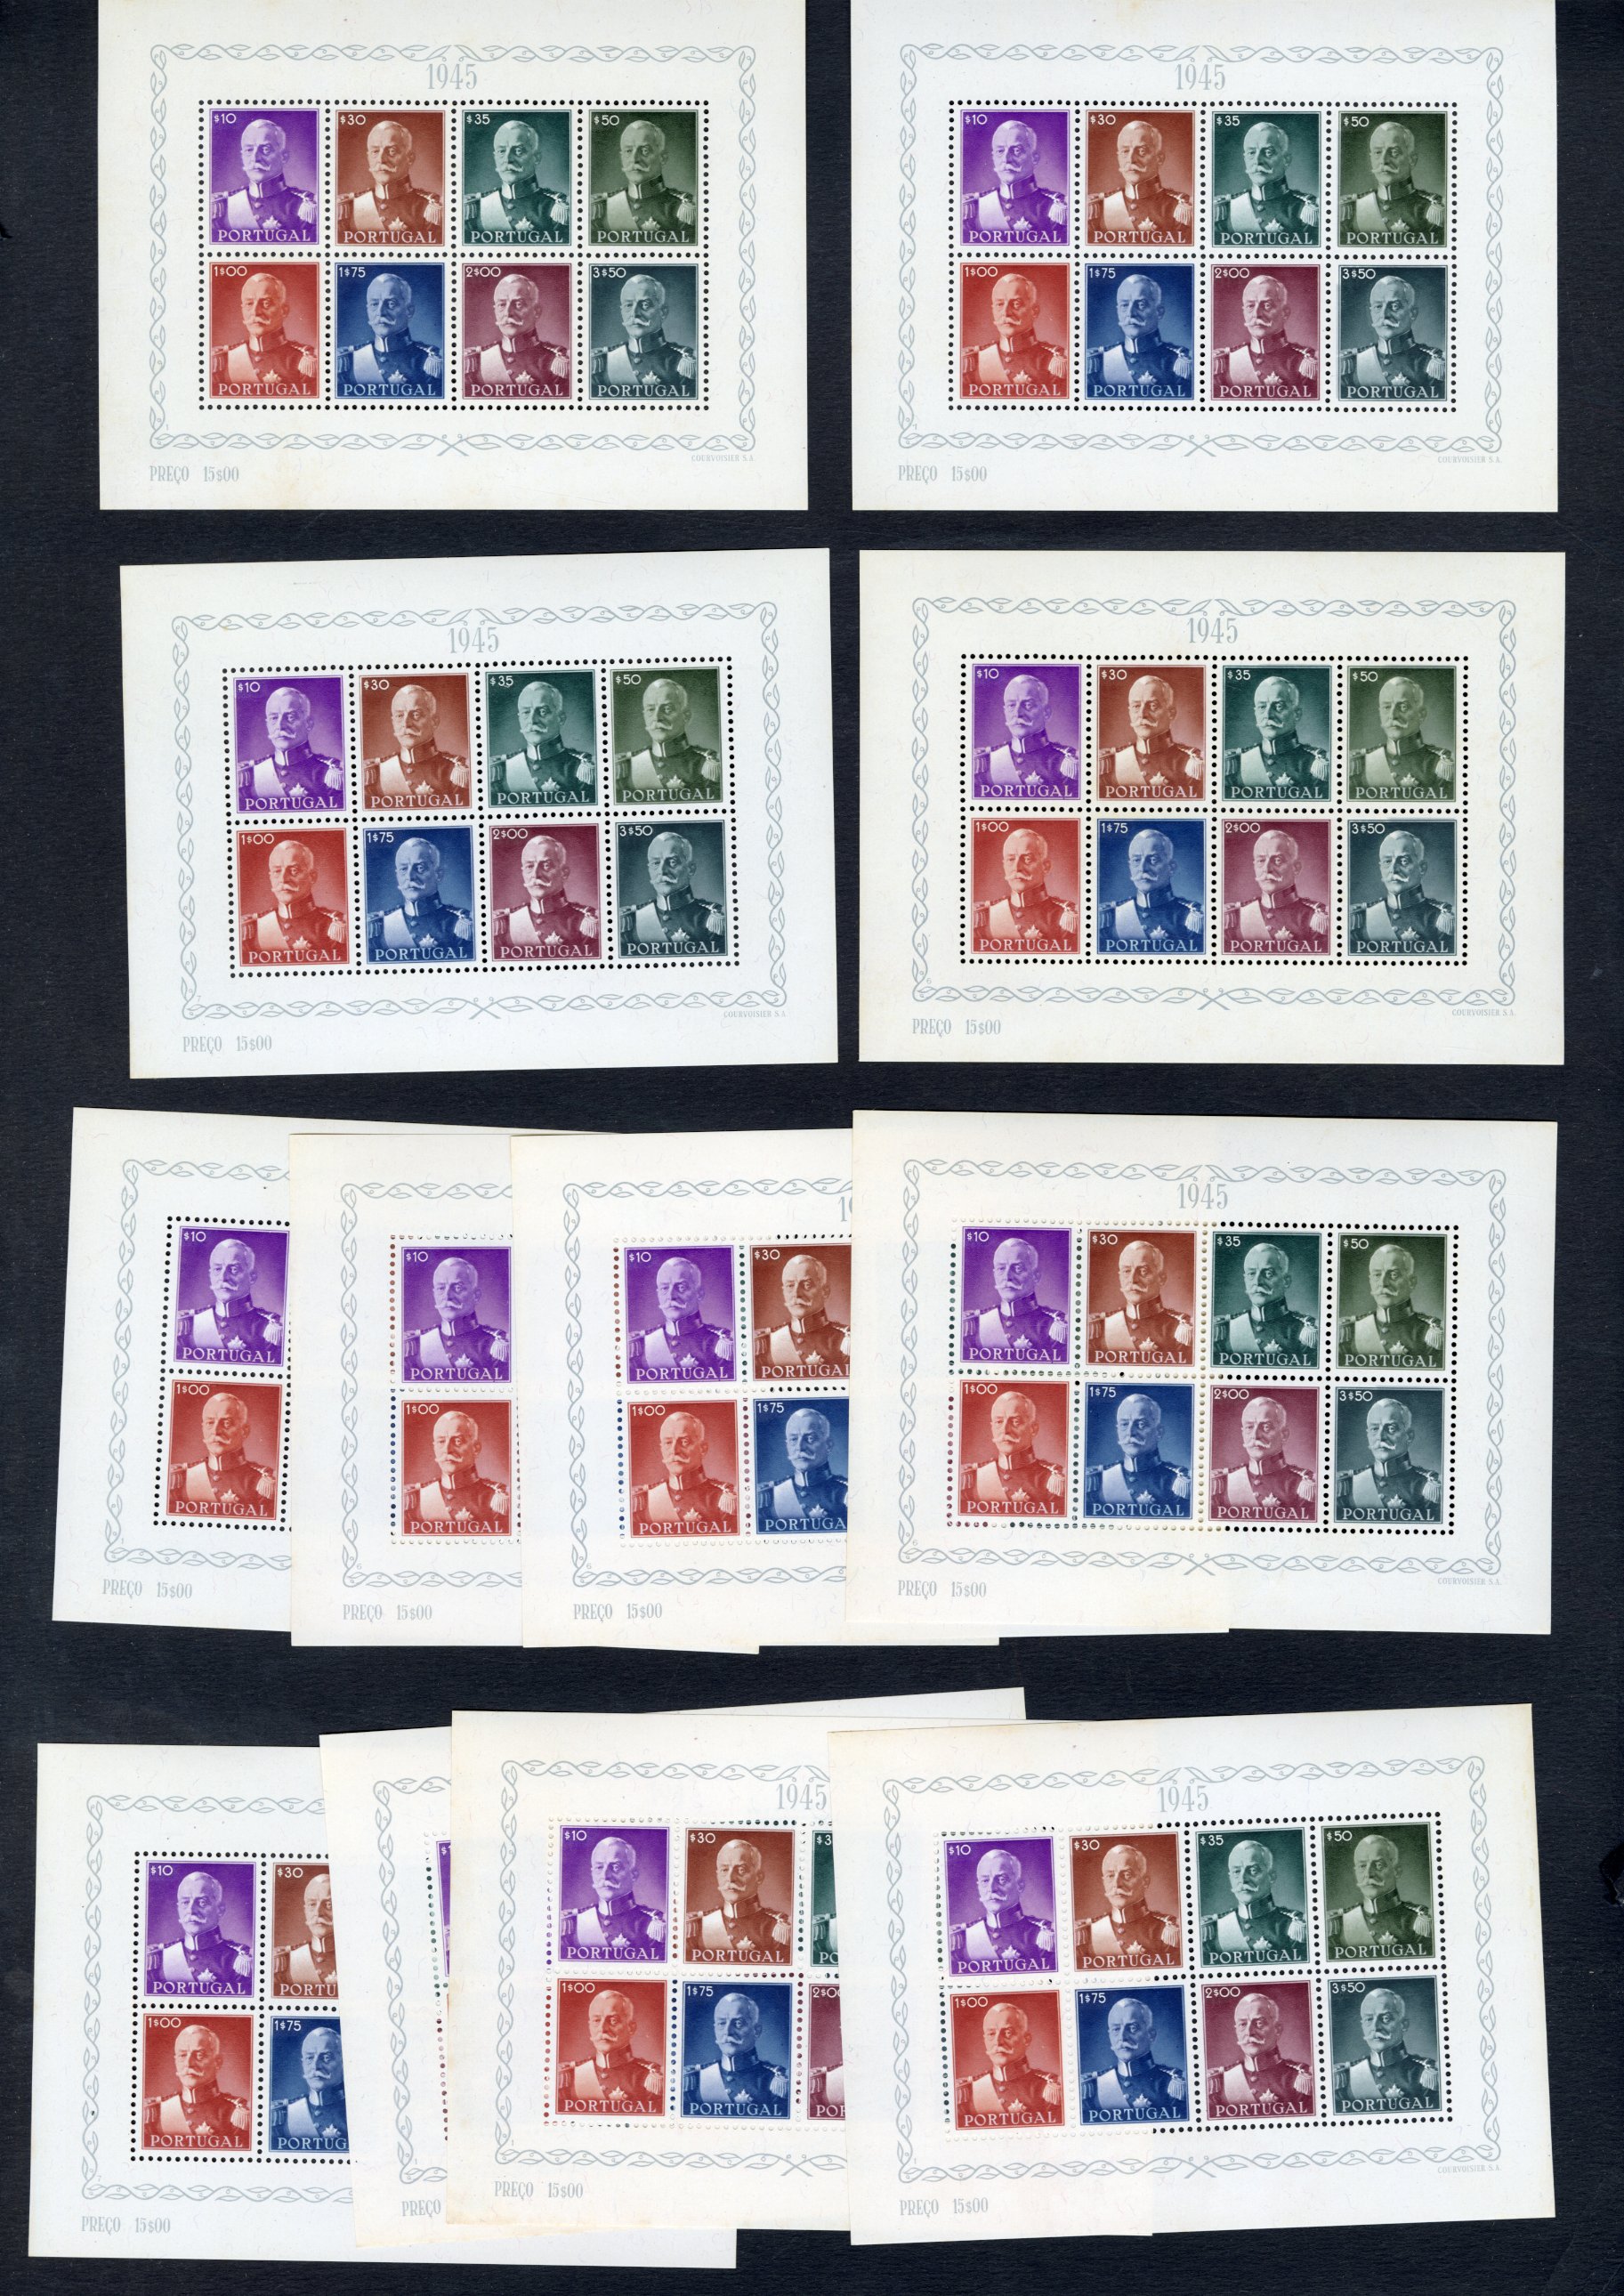 Lot 1514 - LARGE LOTS AND COLLECTIONS WORLDWIDE  -  Cherrystone Auctions U.S. & Worldwide Stamps & Postal History